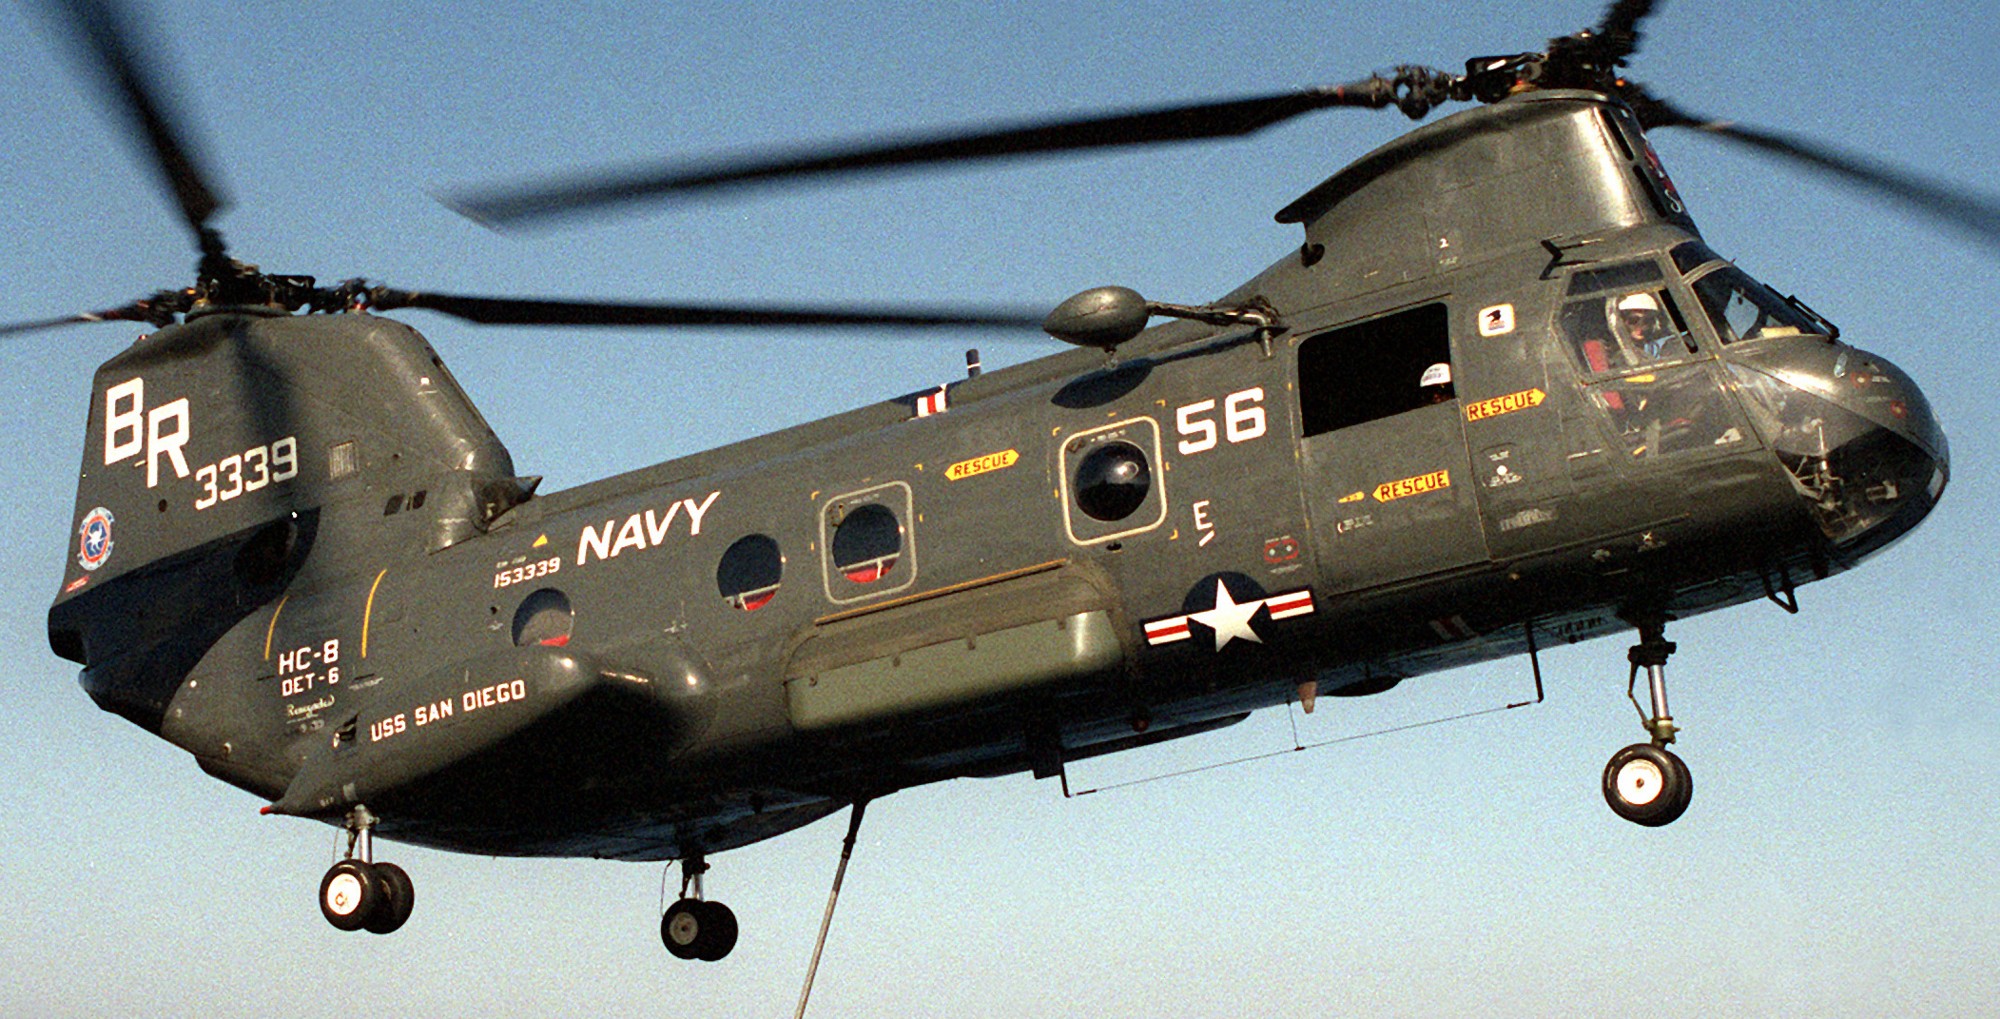 hc-8 dragon whales helicopter combat support squadron navy ch-46 sea knight 44